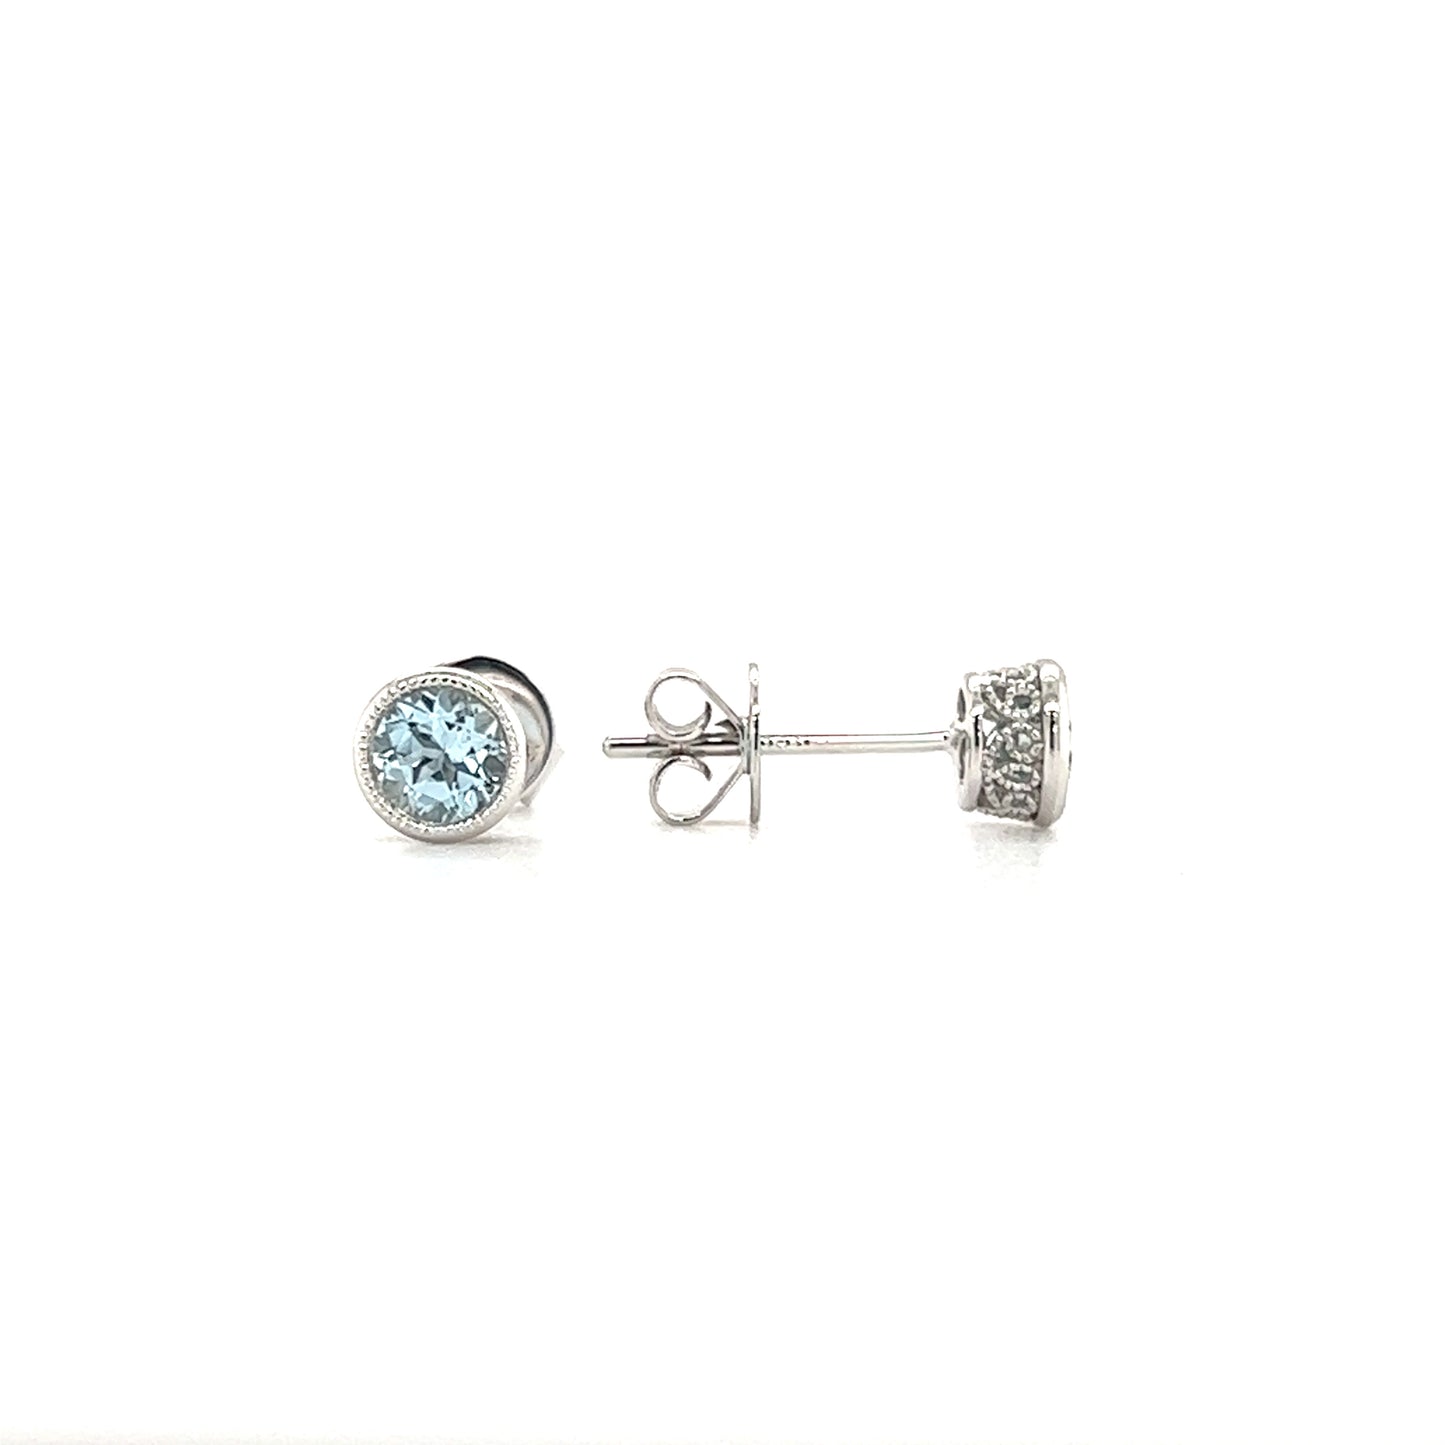 Round Aquamarine Stud Earrings with Filigree and Milgrain in 14K White Gold Front and Side View